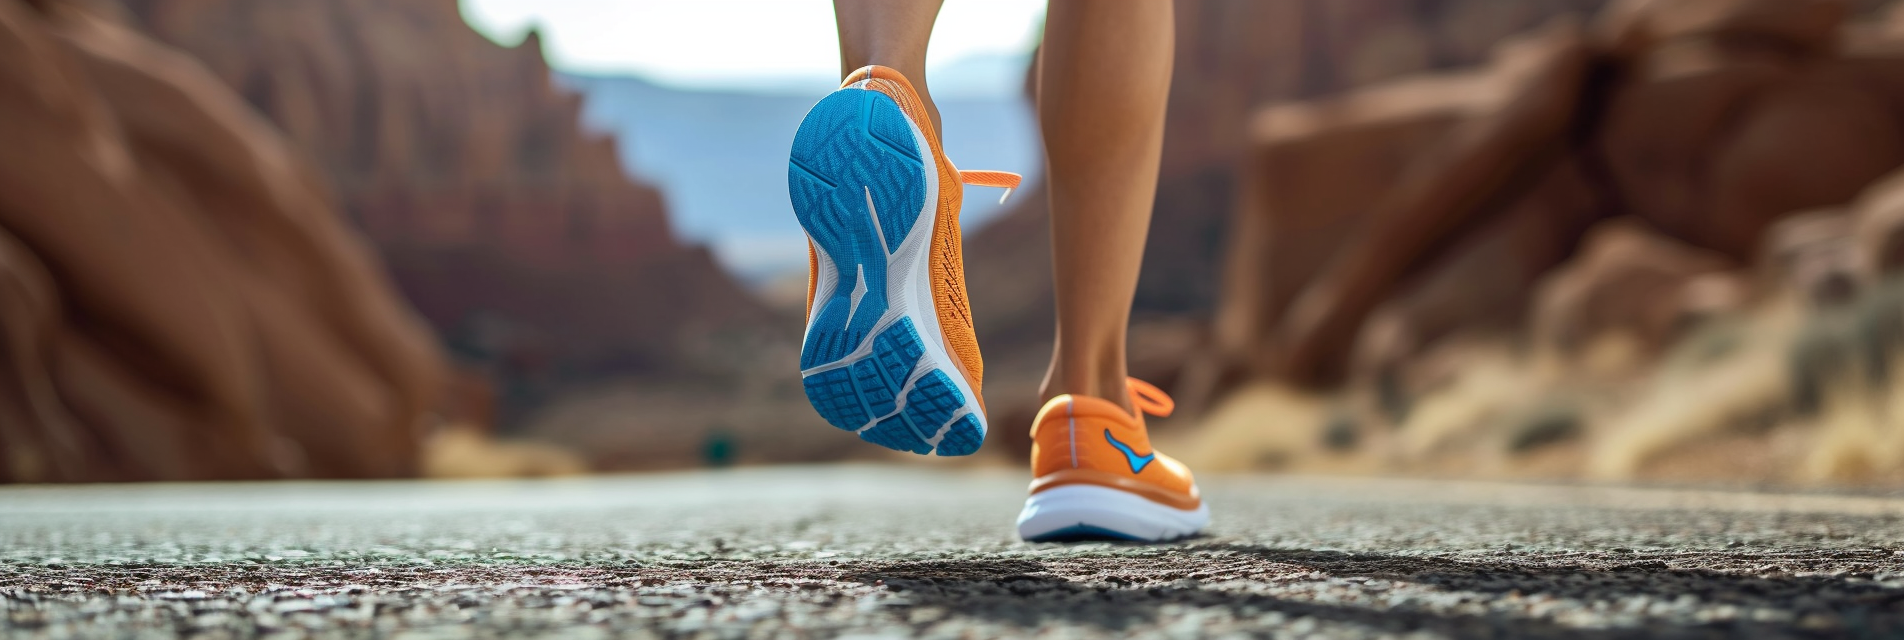 Stepping into Style: The Distinctive Aesthetics of Hoka Shoes